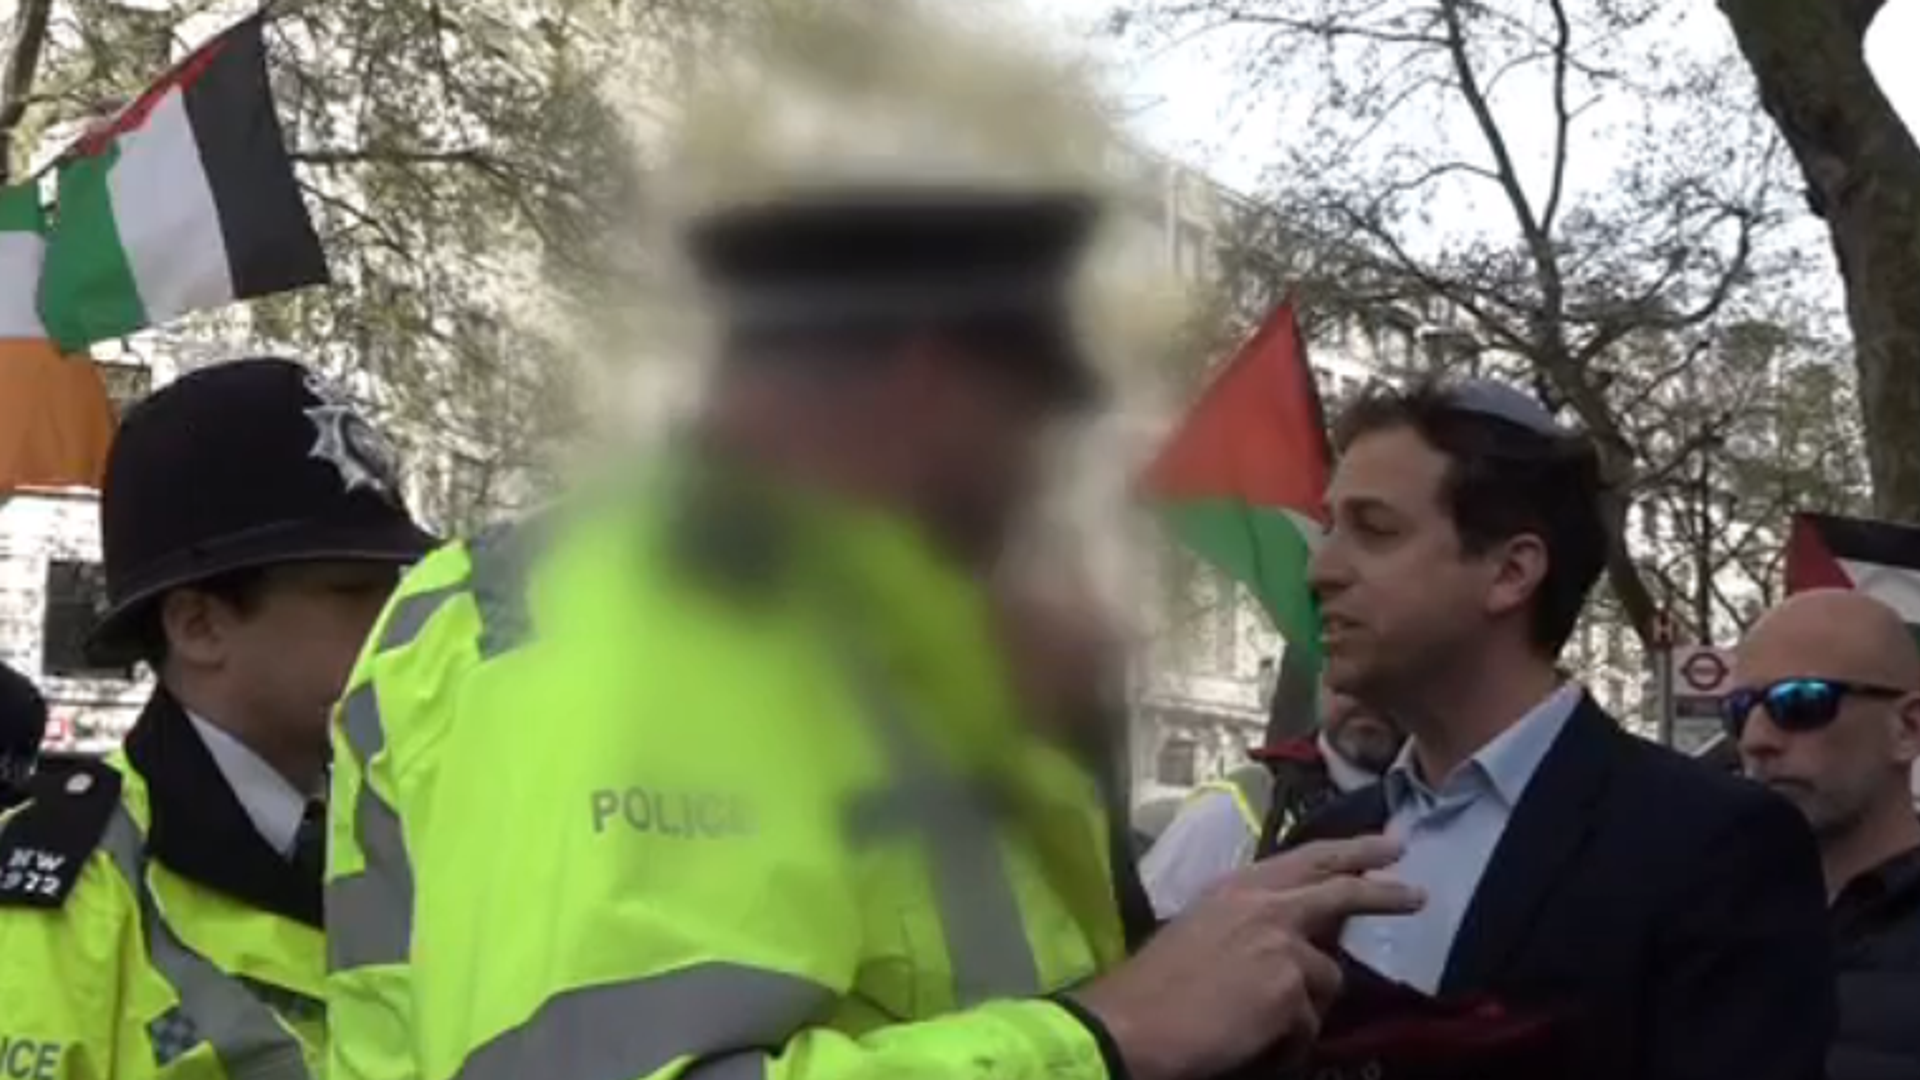 'I was Jewish and crossing the street': Campaigner criticises 'outrageous' reaction to row